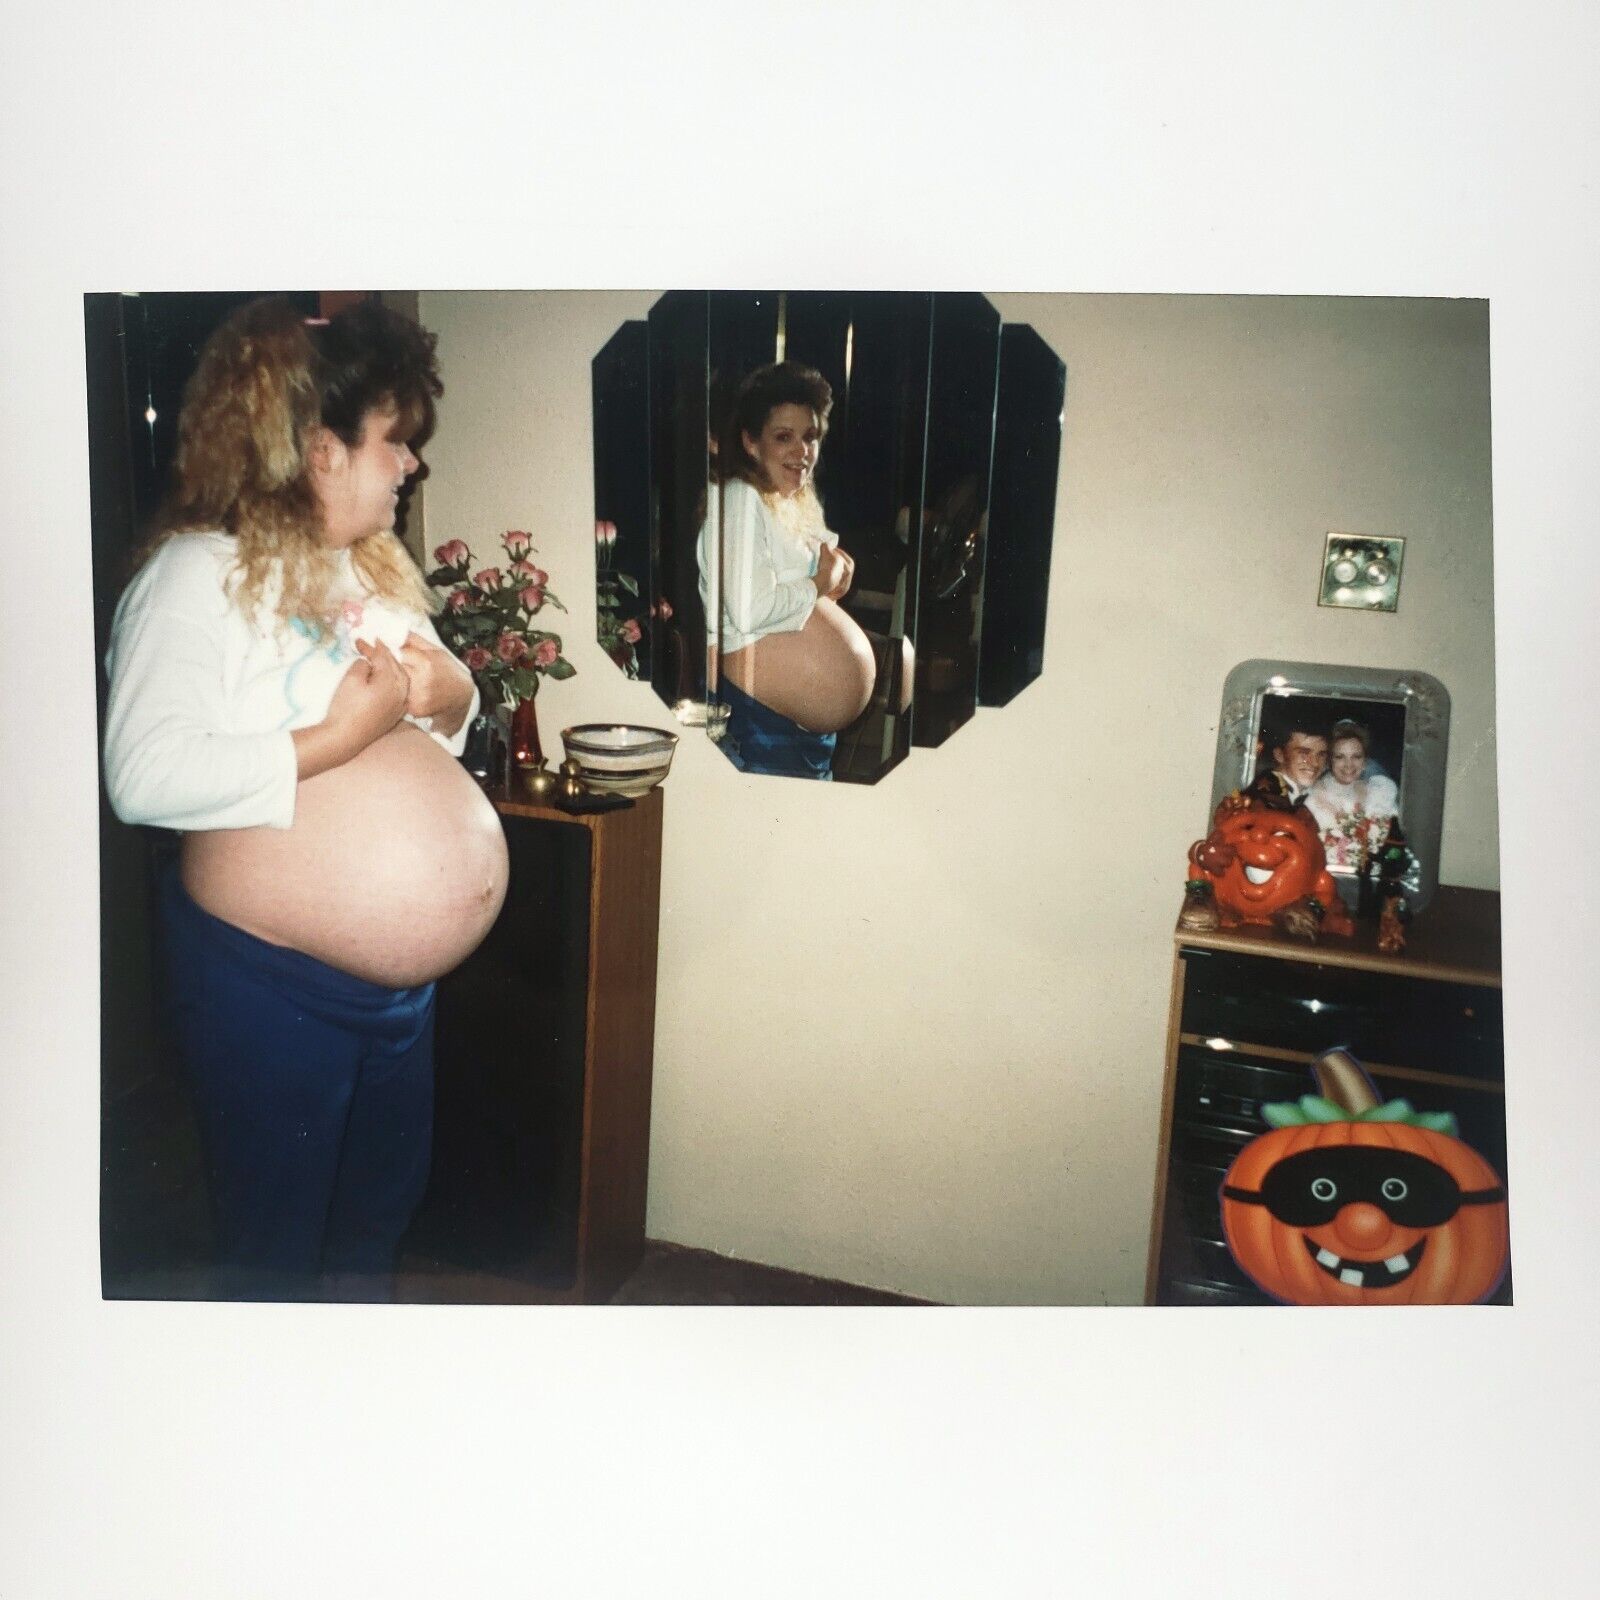 Bare Belly Pregnant Woman Photo 1990s Halloween Mirror Reflection Snapshot A3917